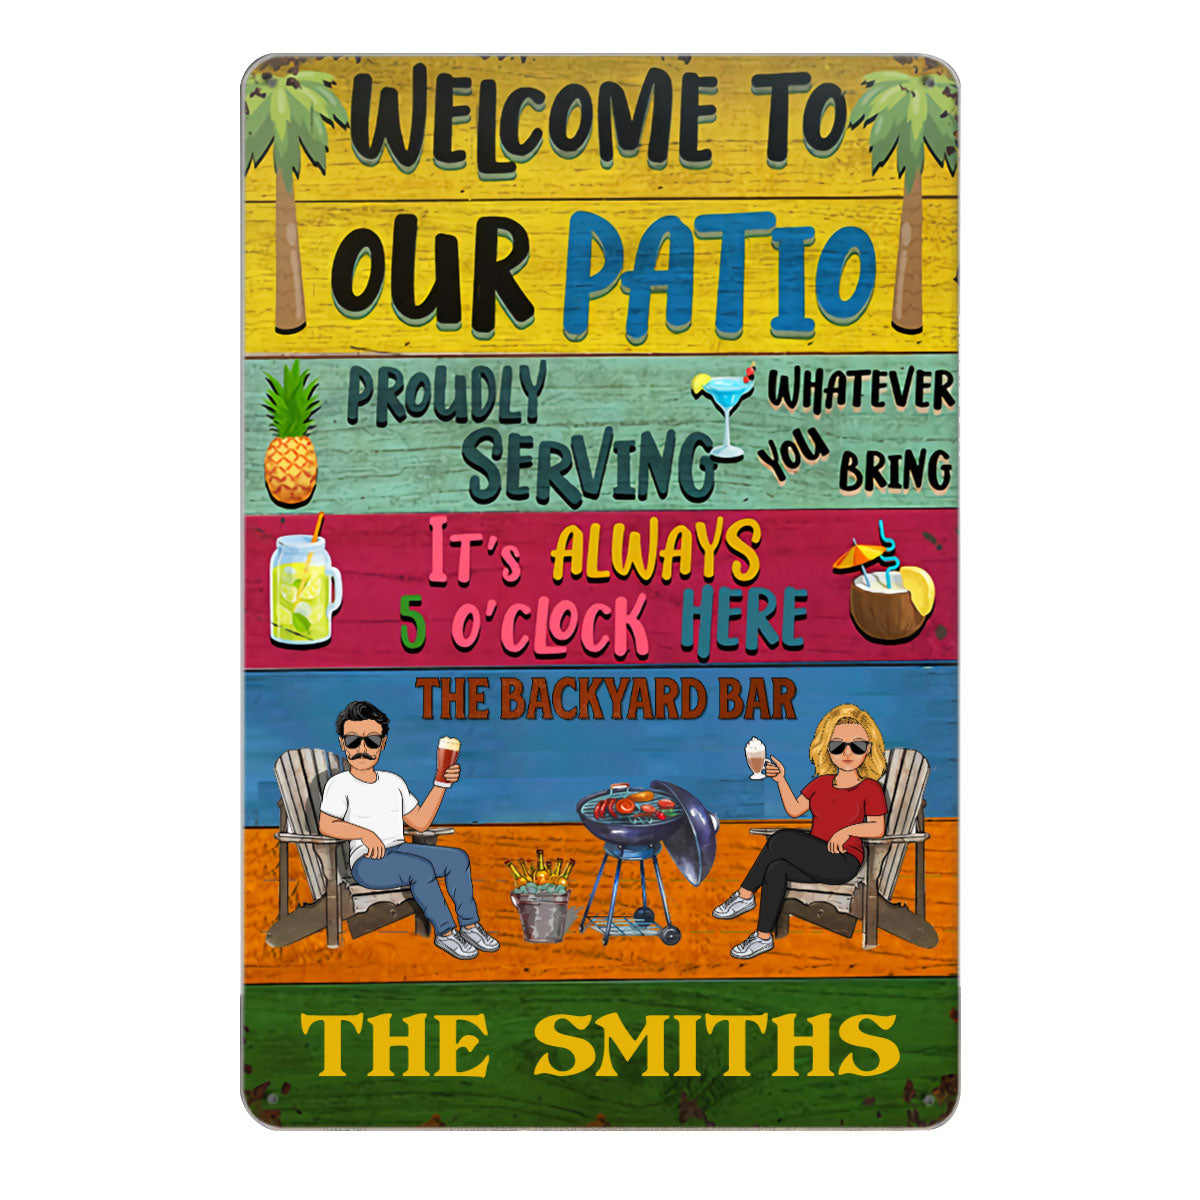 Patio Welcome Grilling Proudly Serving What You Bringing - Backyard Sign - パーソナライズされたカスタムクラシックメタルサイン